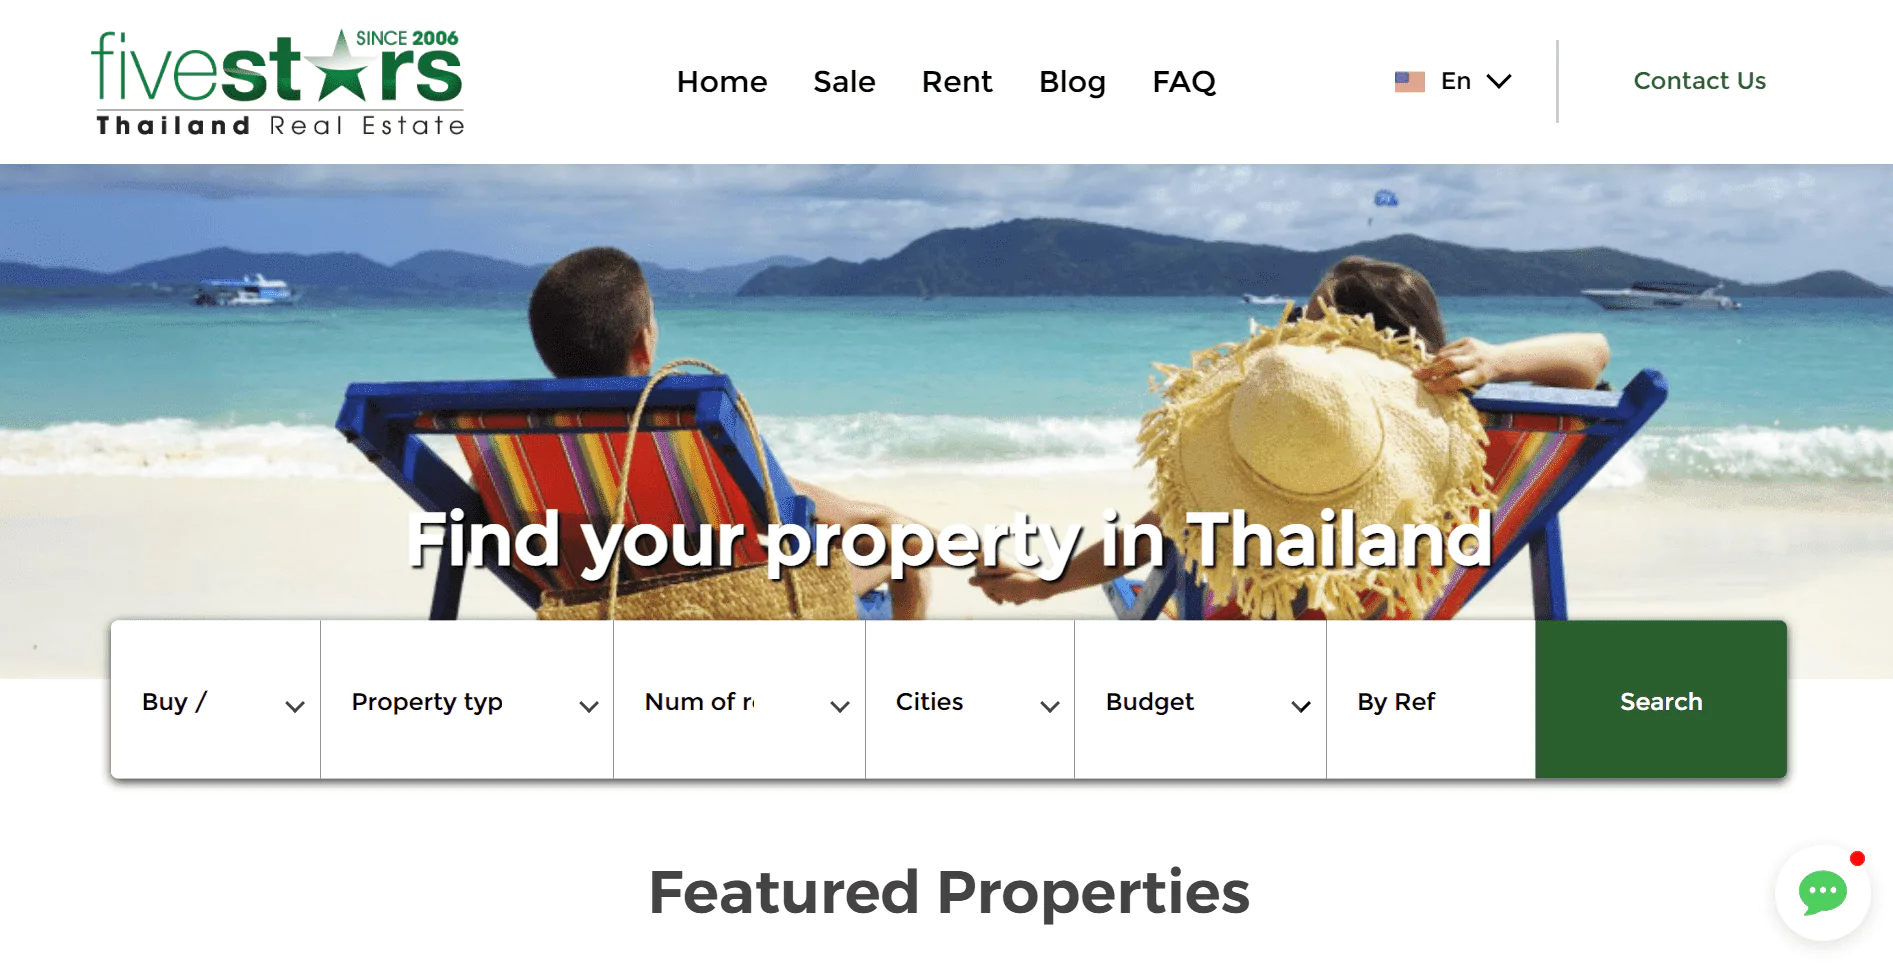 baccana-digital-consulting-our-works-five-star-thailand-real-estate-agency-homepage